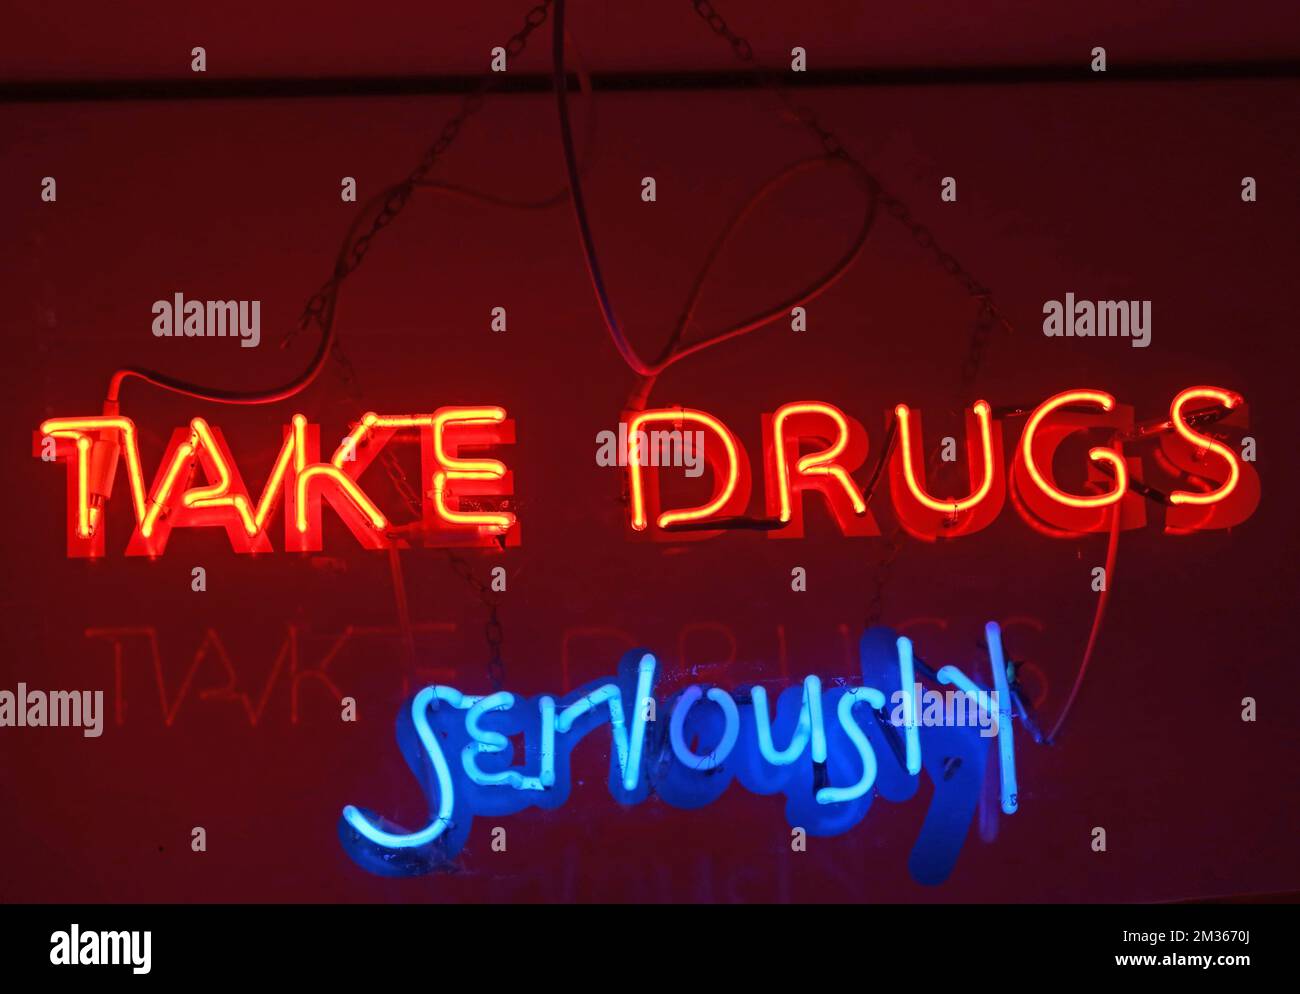 Take Drugs Seriously, neon sign, Crew 2000, mind altering, harm reduction and outreach charity, 32 Cockburn Street, Edinburgh,Scotland, EH1 1PB Stock Photo